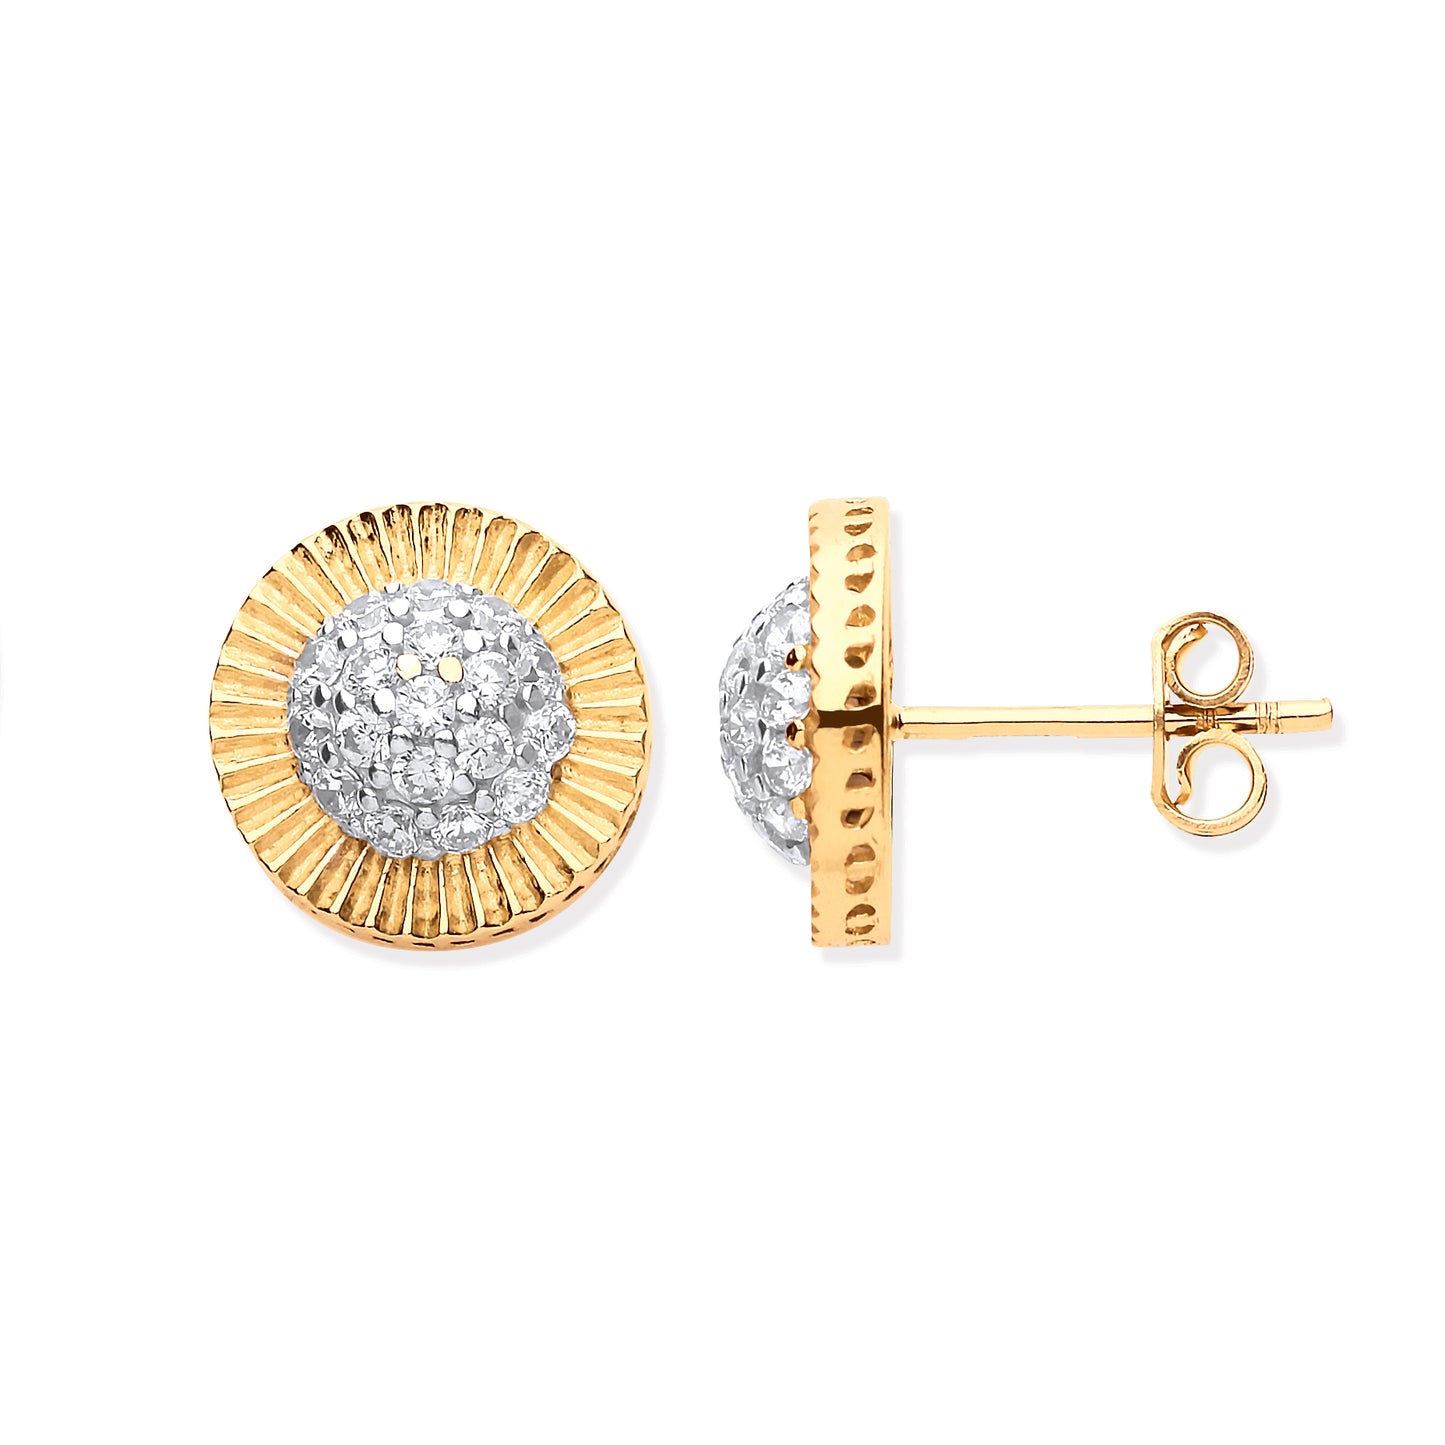 Gold Cz Round Stud Earrings